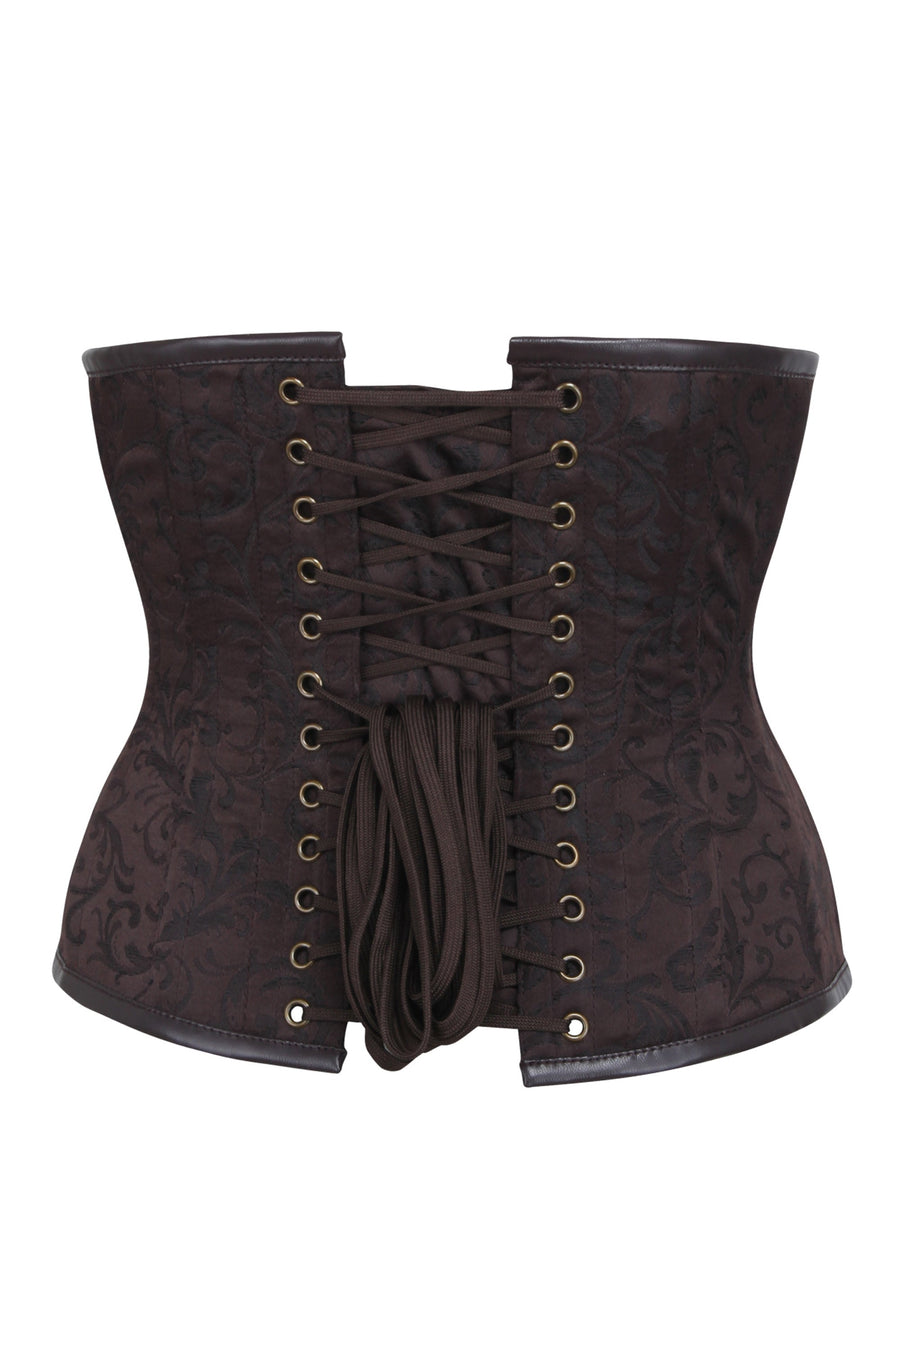 Scroll Pattern Zip Front Grommet Lace Up Back Overbust Corset